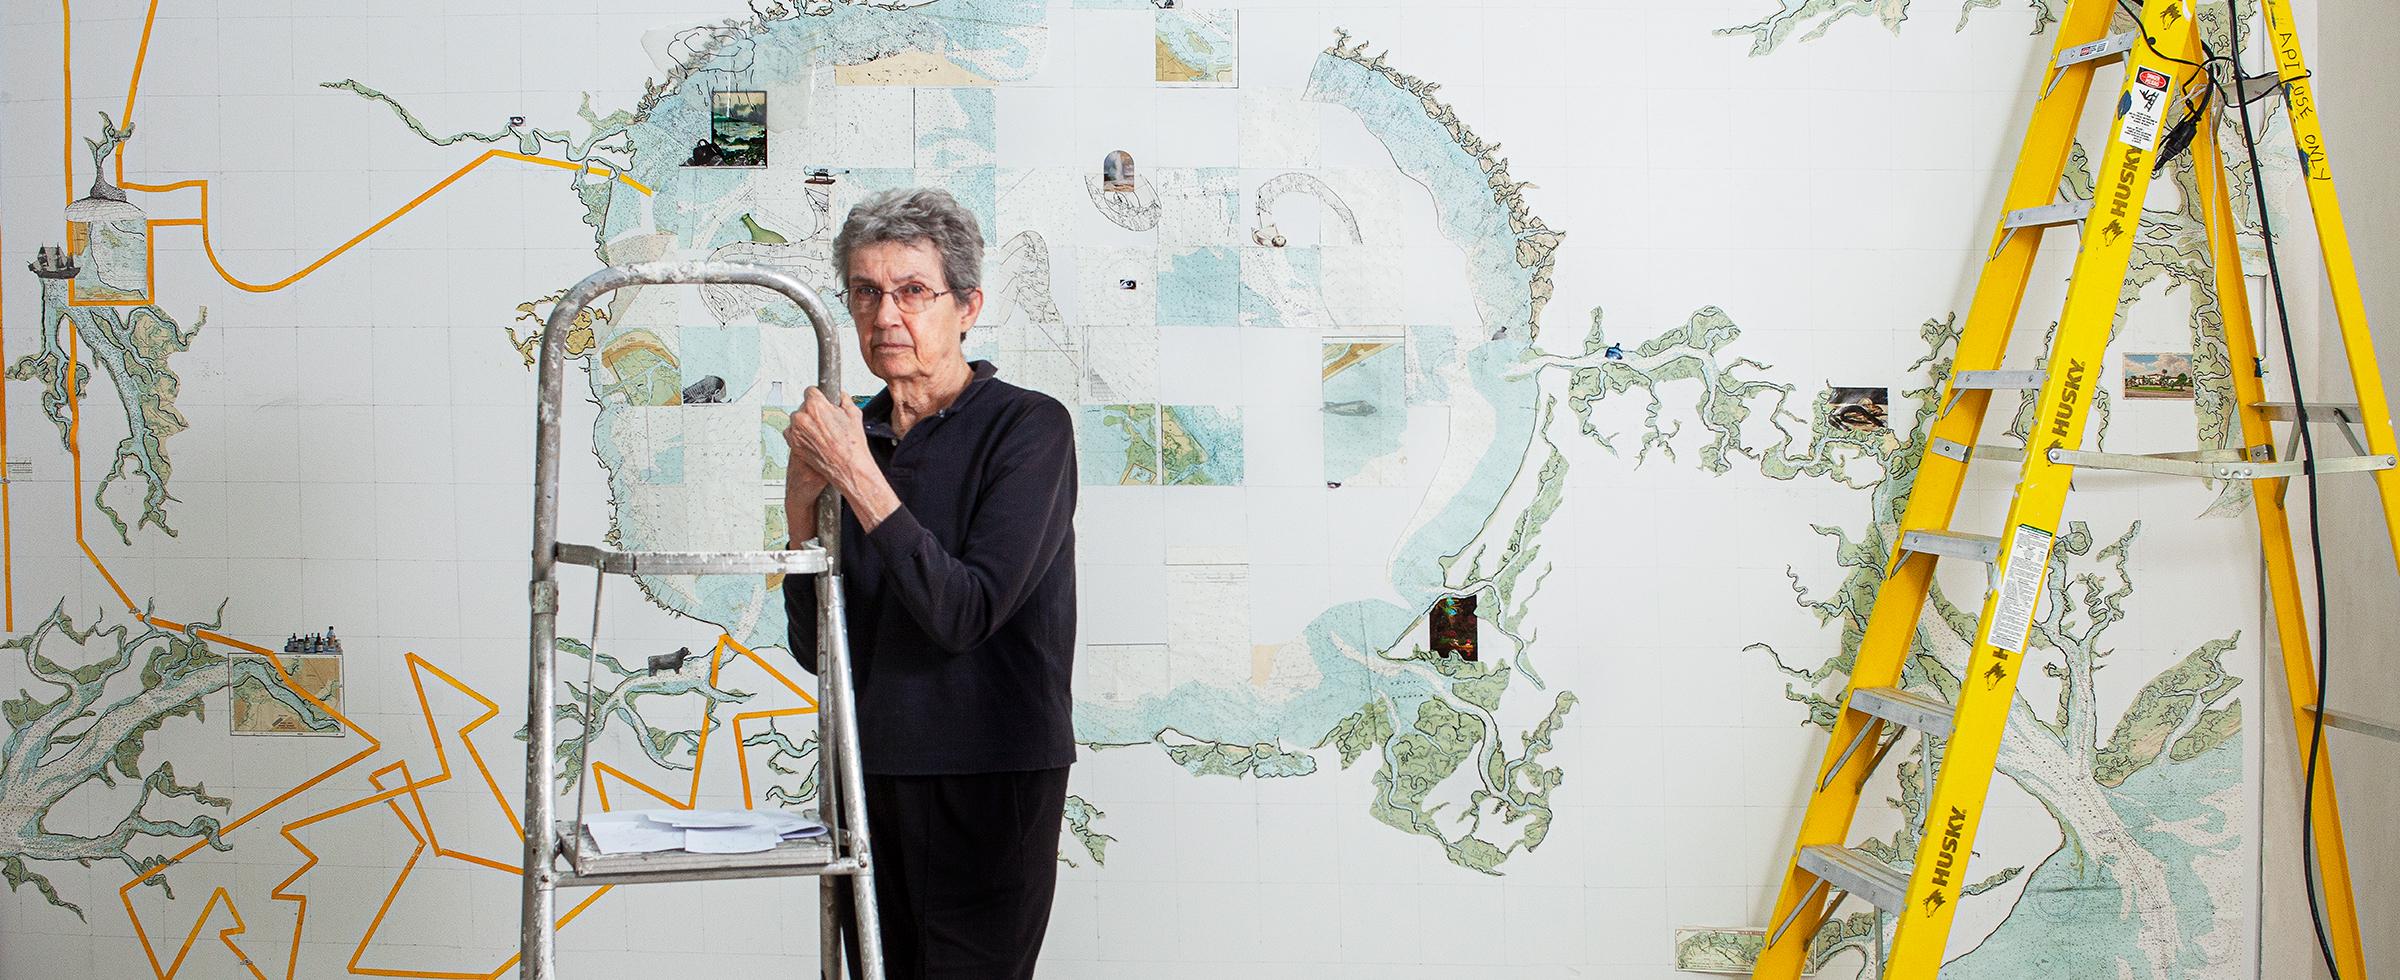 Visual Artist Aldwyth, a 2019 Eben Demarest Fund awardee, stands with her painting, titled “A Foot, a Fathom, a Furlong.” in progress at Jepson Telfair, Savannah GA, 2010. Photo by Jerry Siegel.